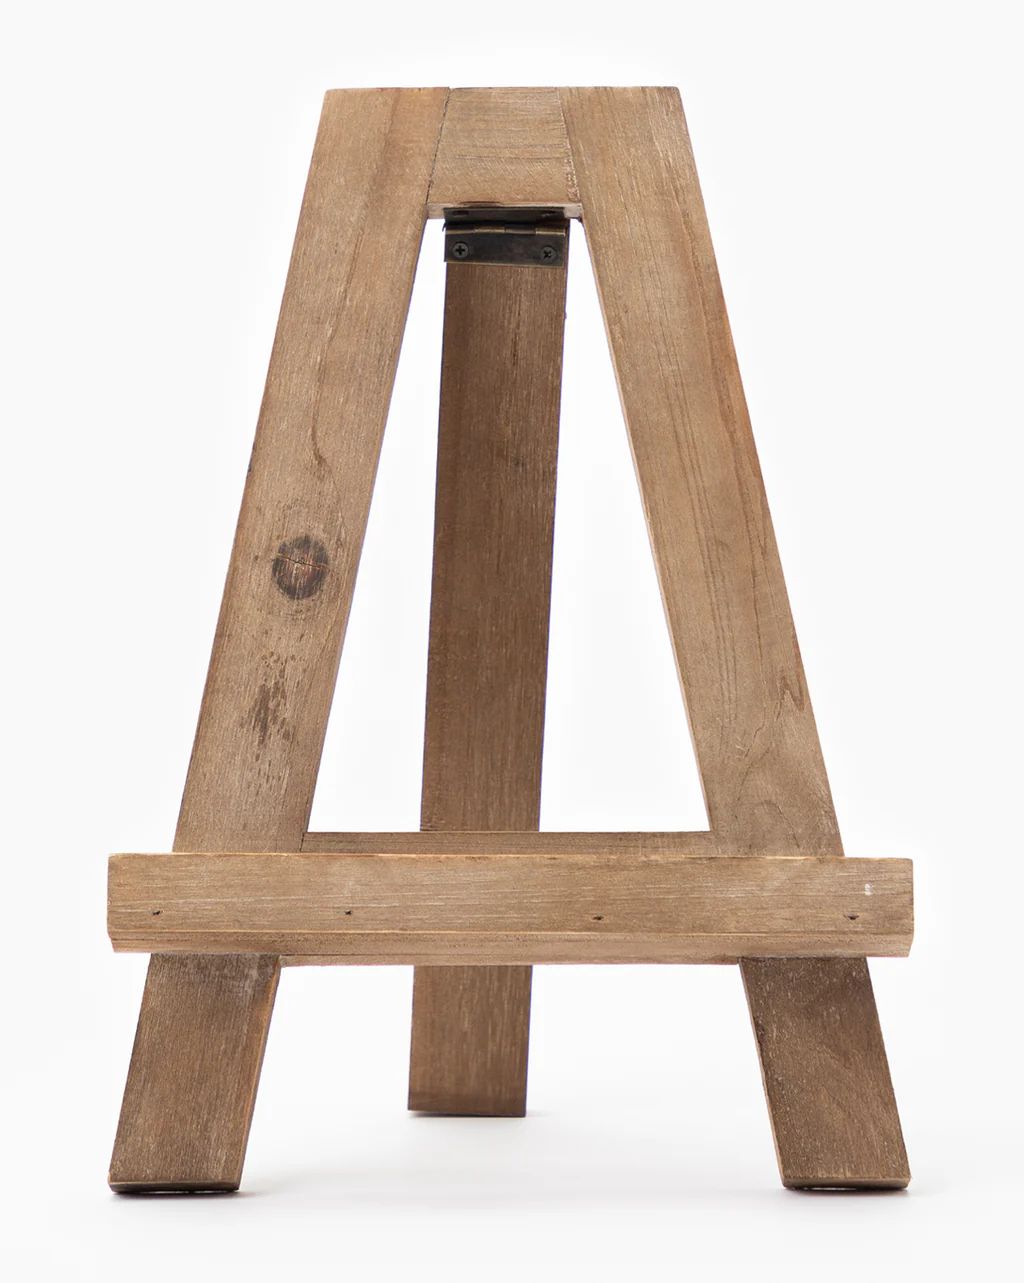 Wooden Easel Object | McGee & Co.